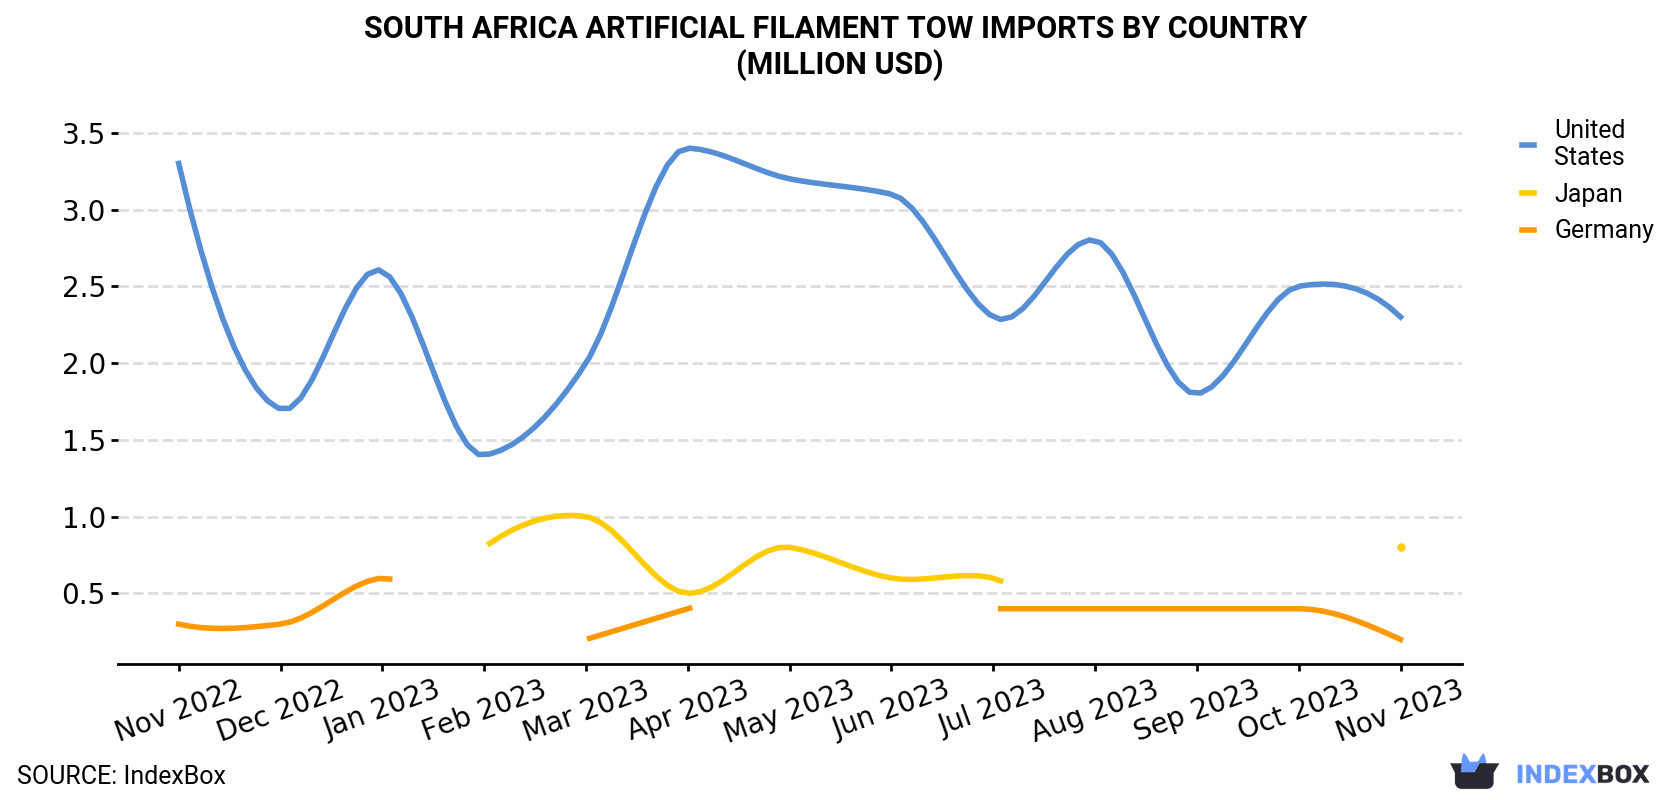 South Africa Artificial Filament Tow Imports By Country (Million USD)